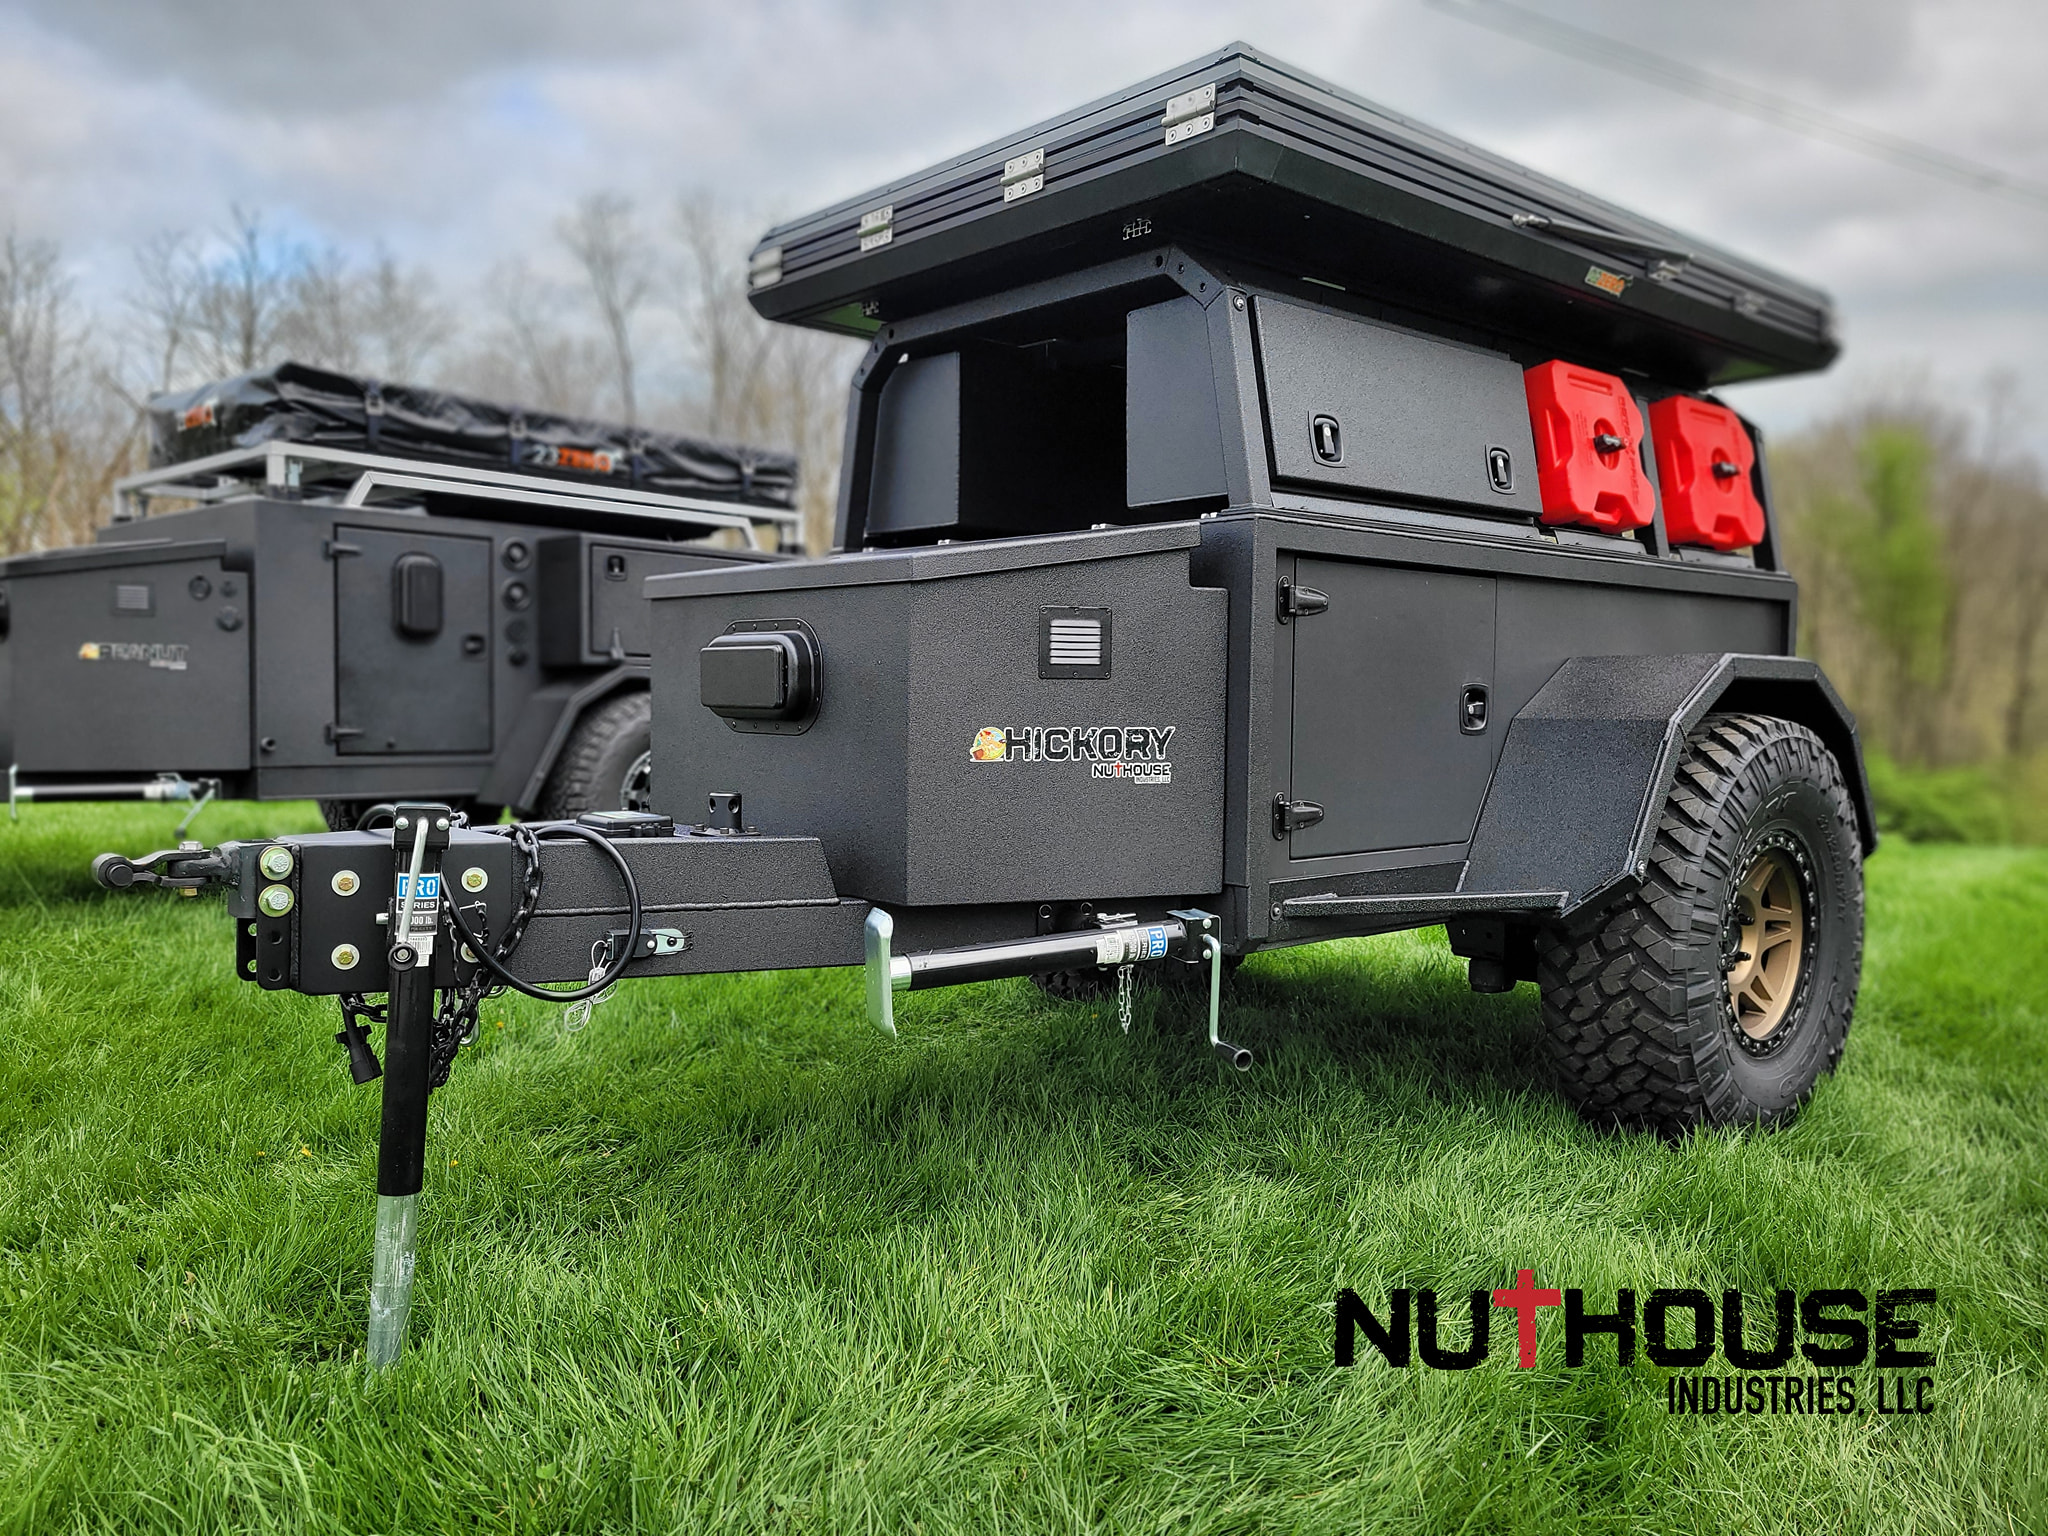 Hickory Expedition Trailer - Nuthouse Industries